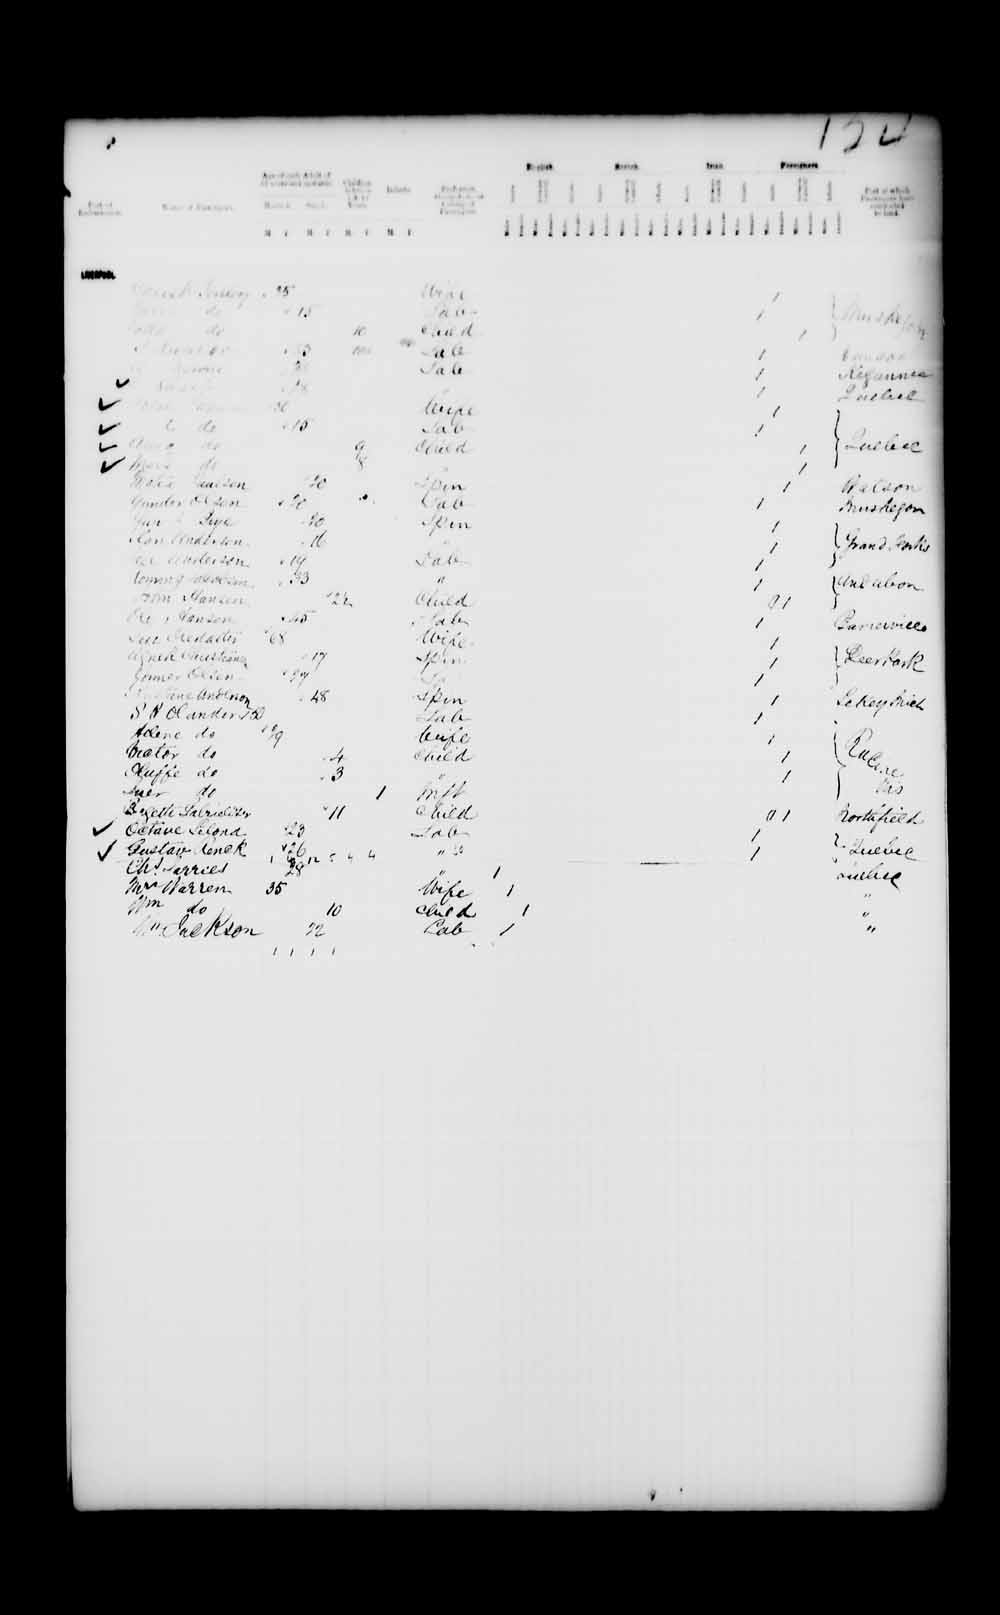 Digitized page of Passenger Lists for Image No.: e003541217